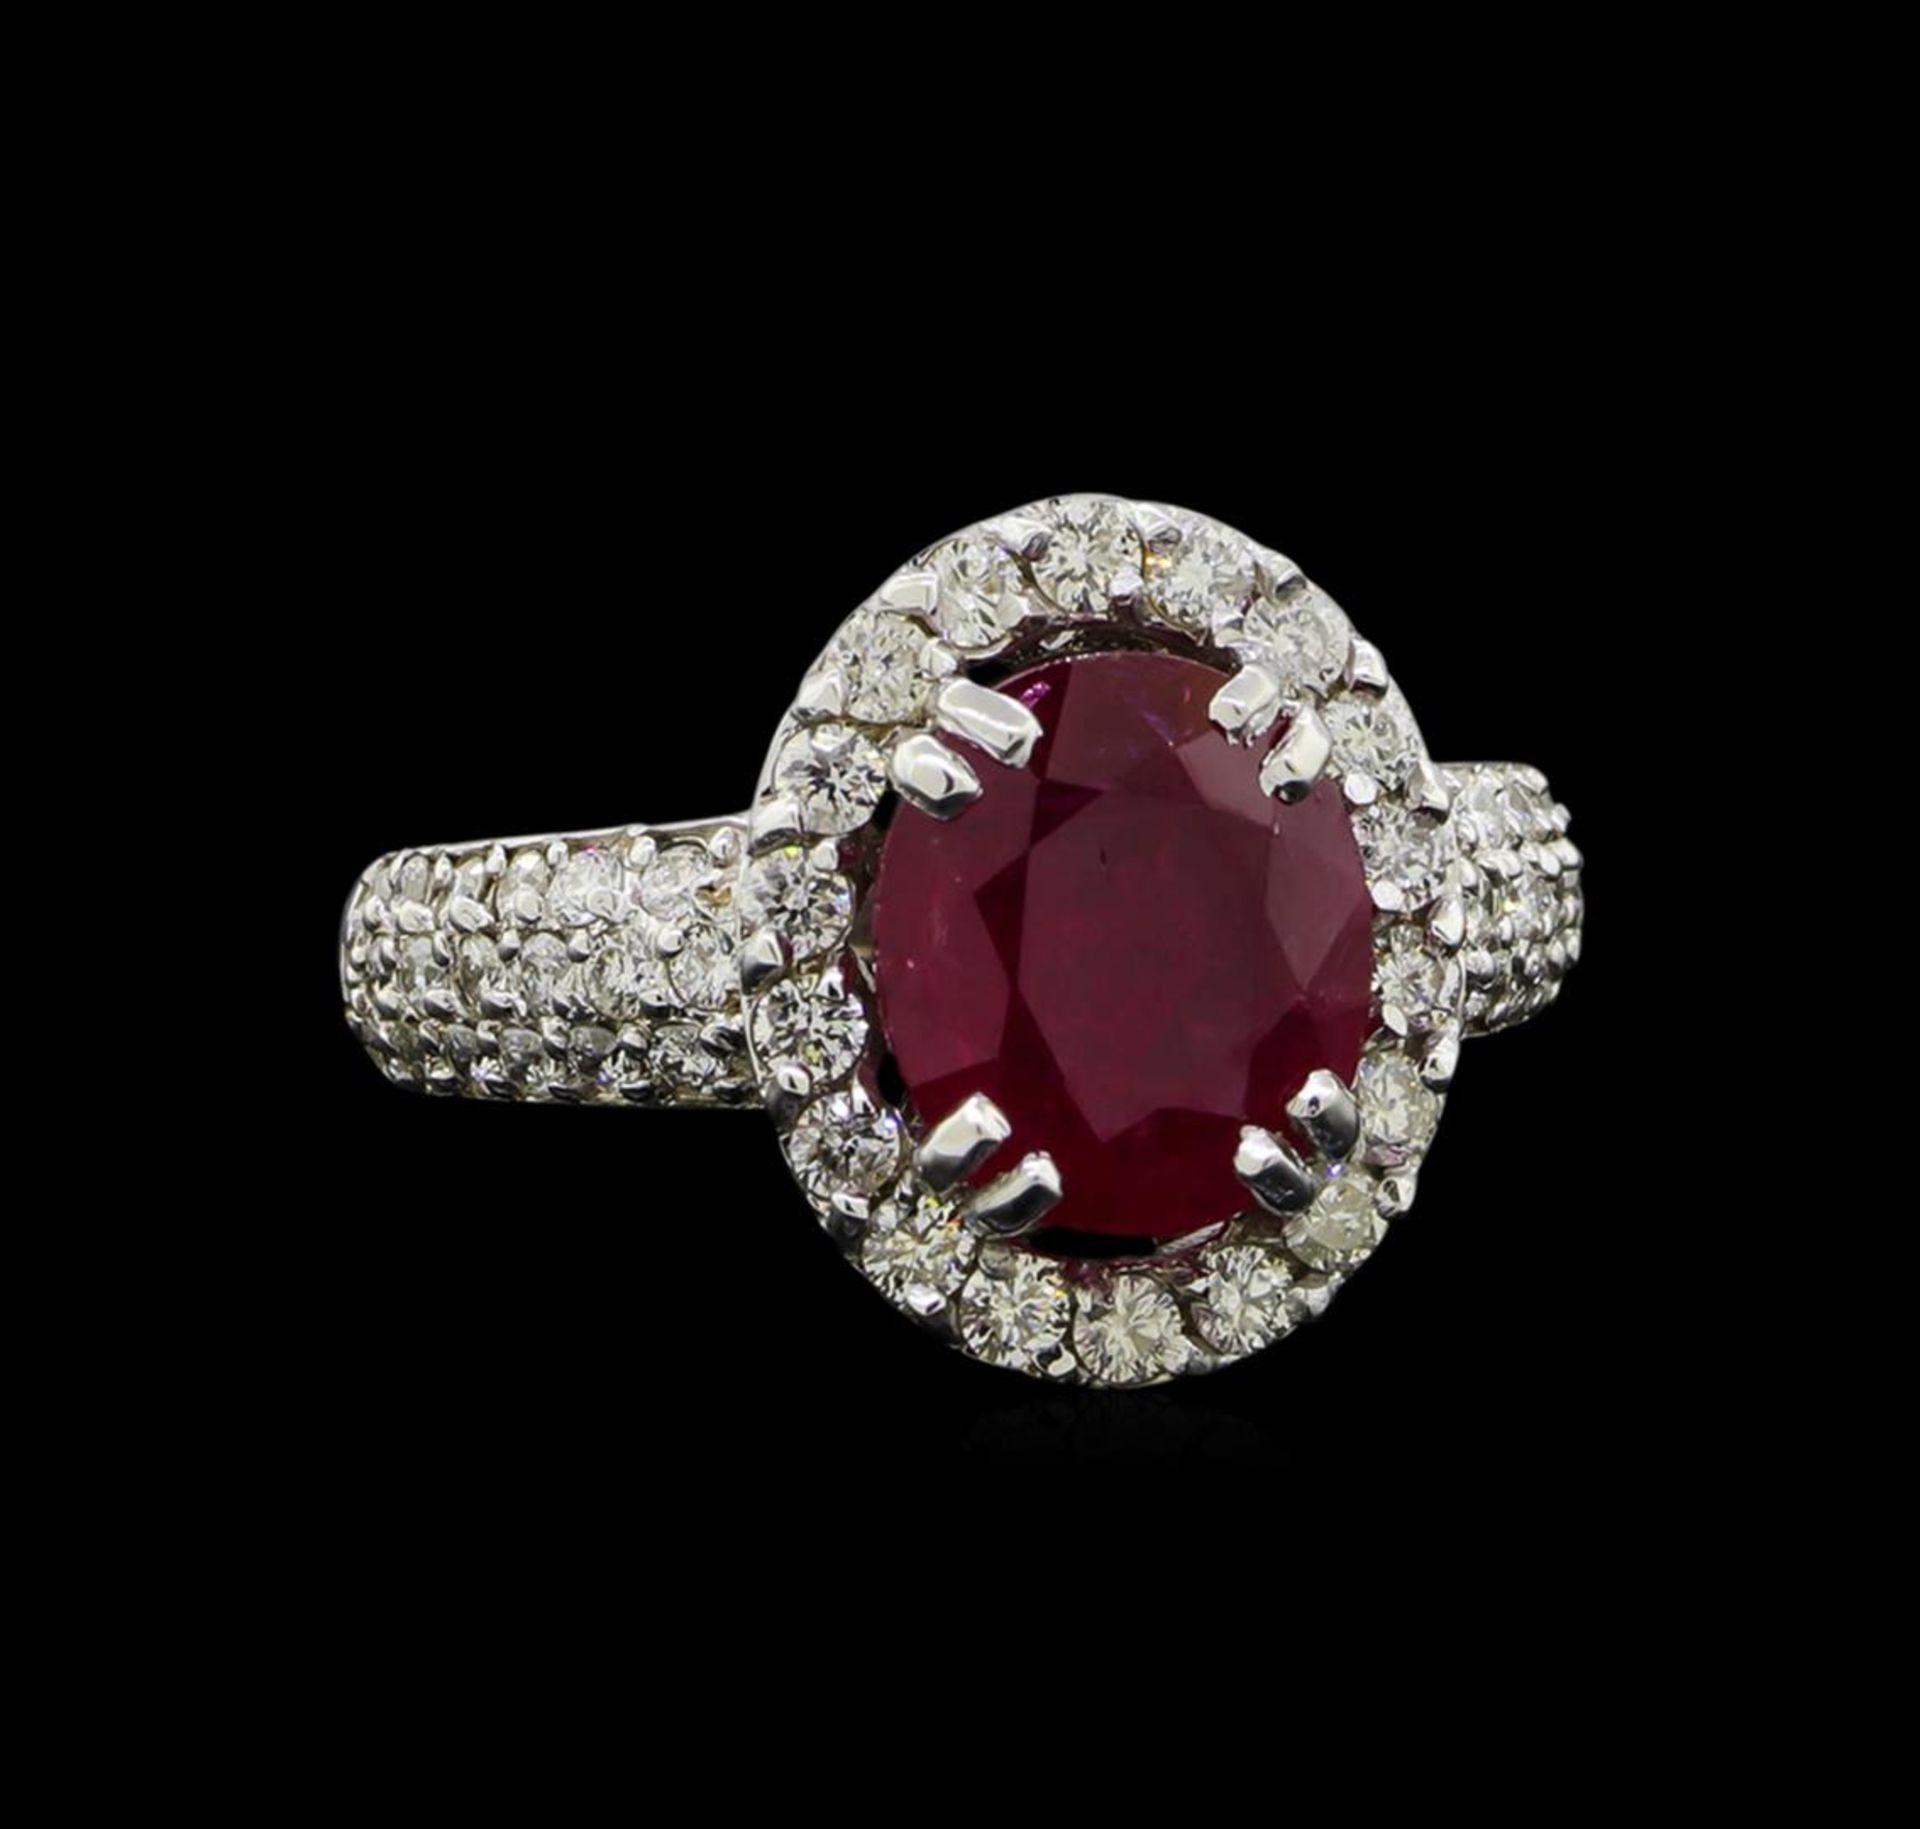 GIA Cert 3.24 ctw Ruby and Diamond Ring - 14KT White Gold